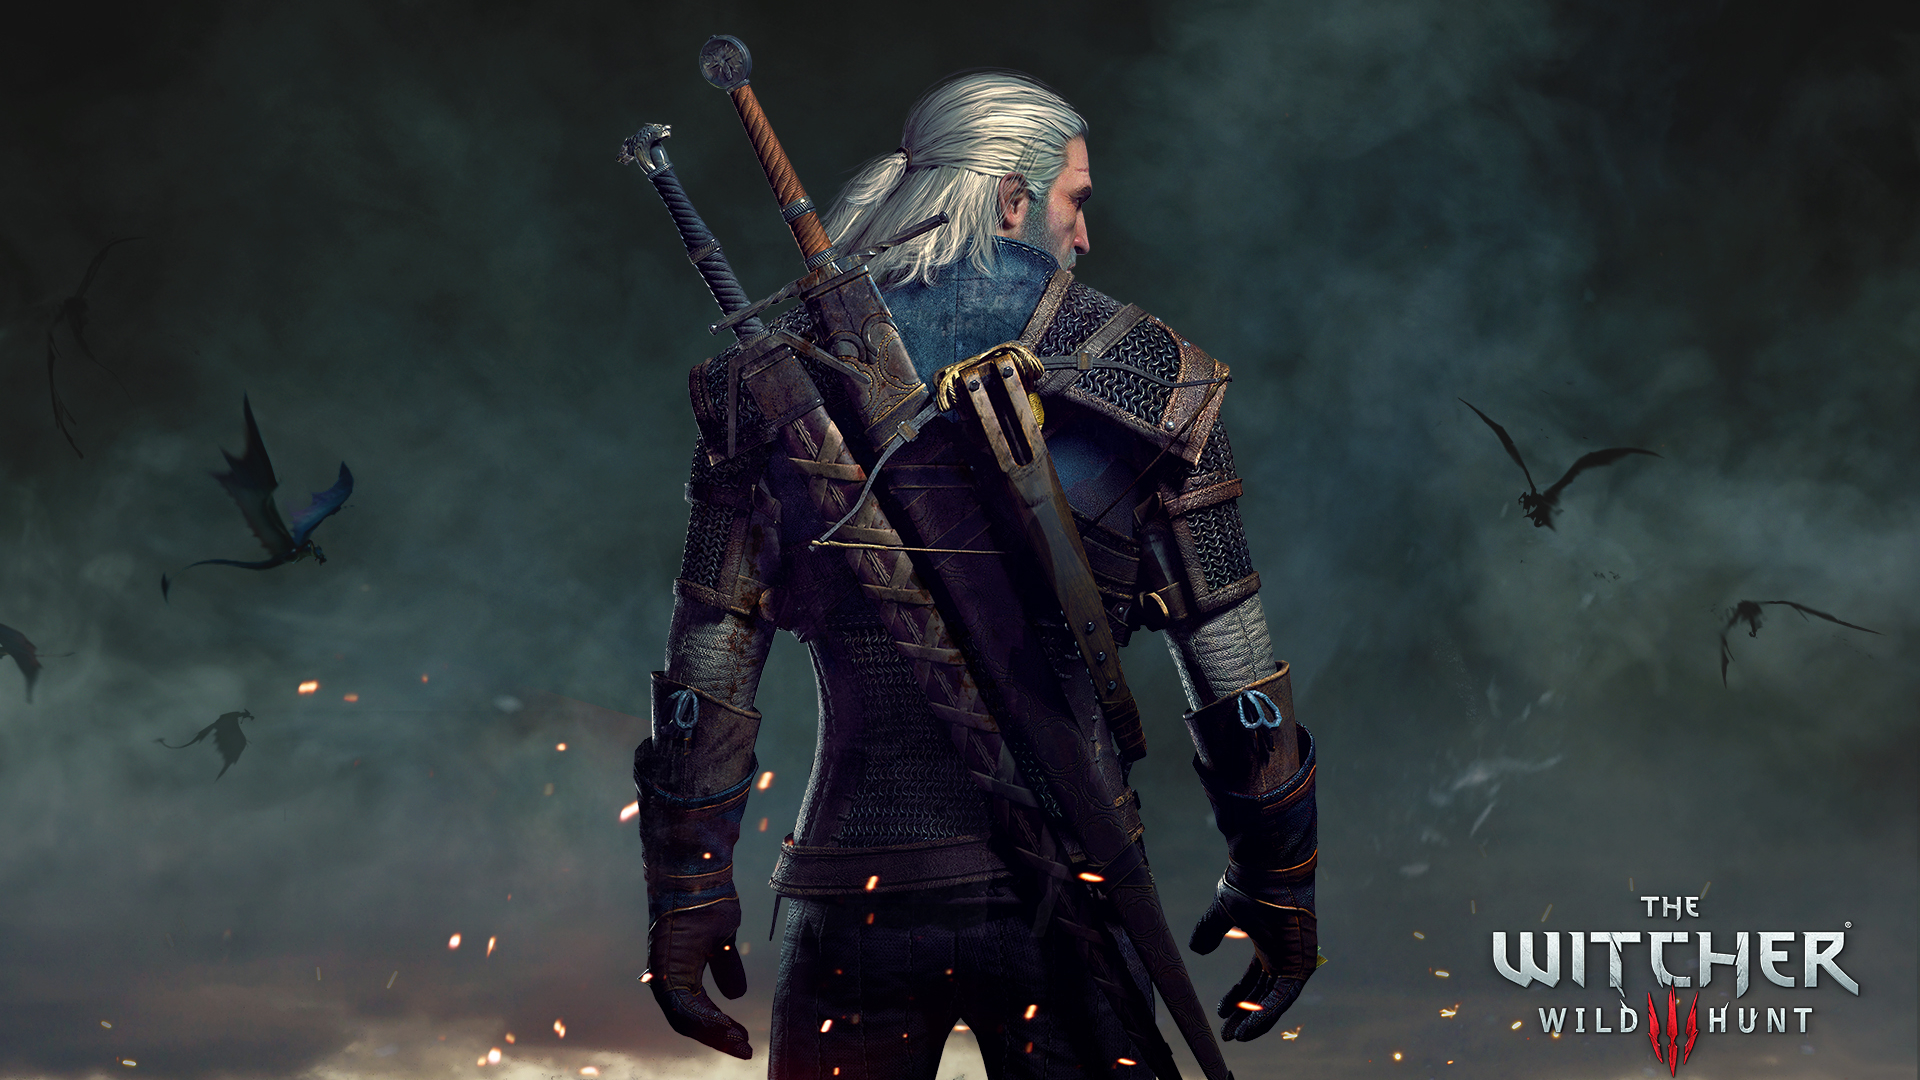 Geralt's back Wallpaper from The Witcher 3: Wild Hunt